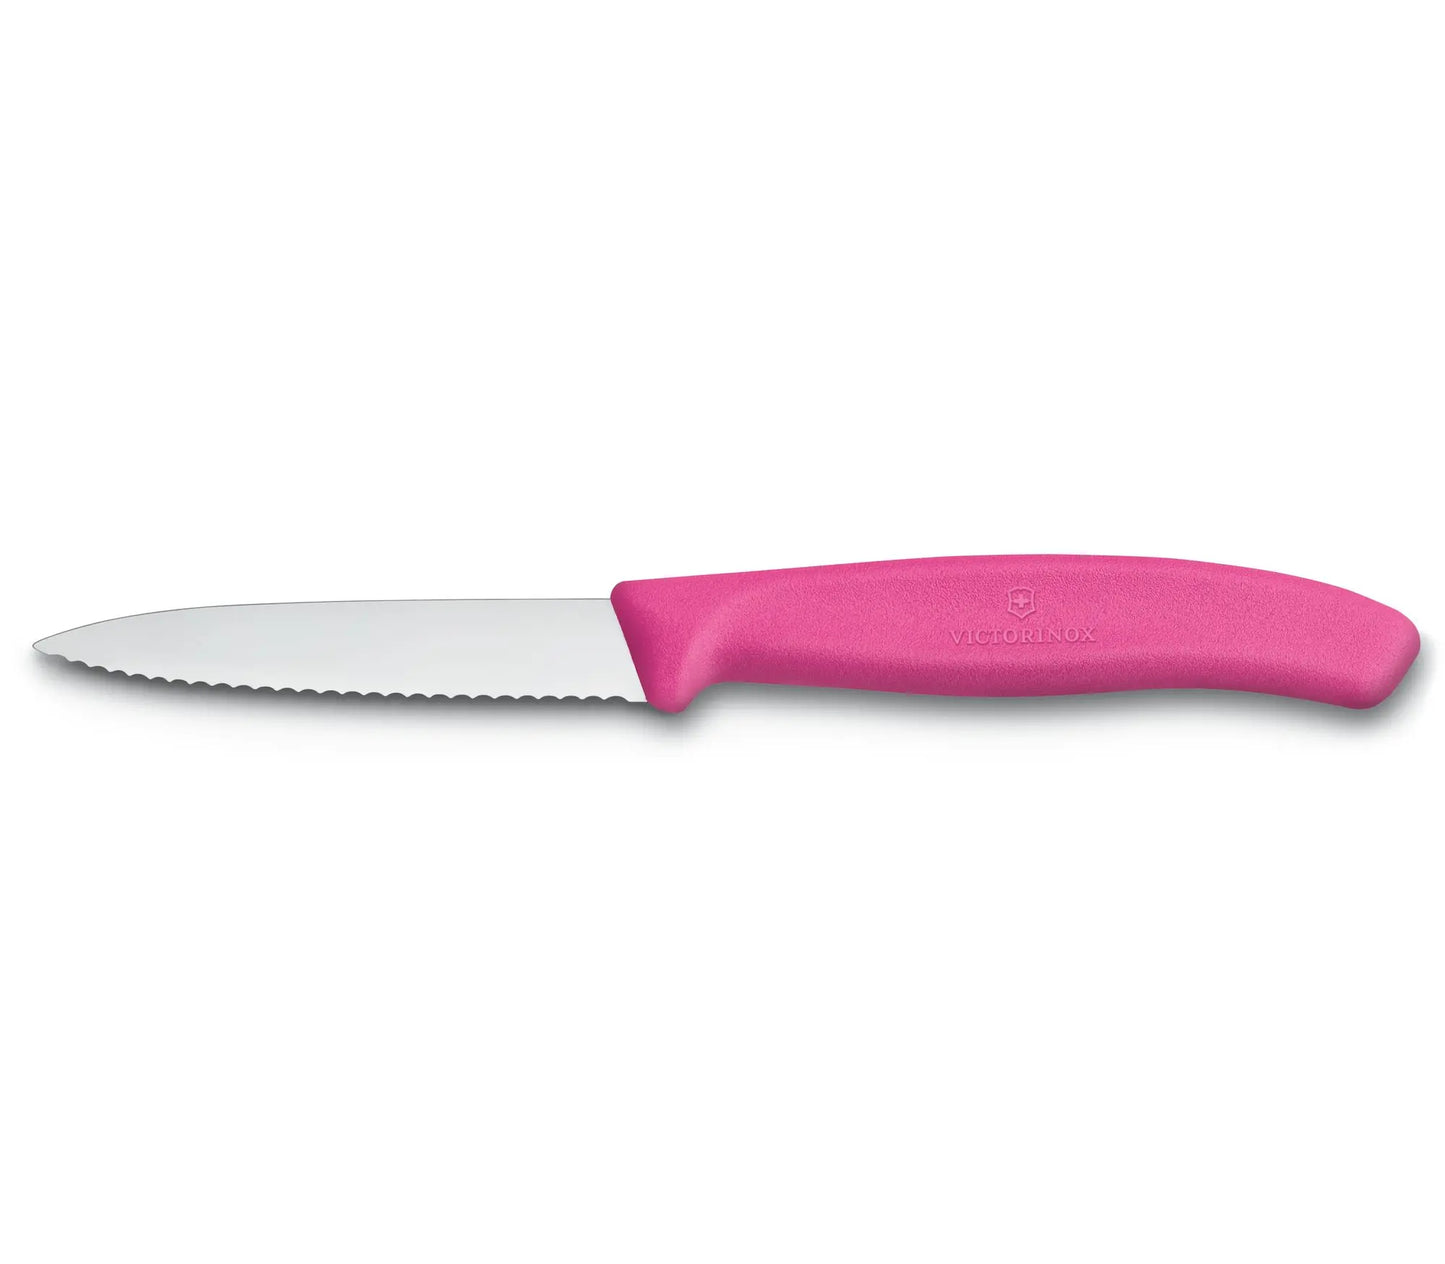 Victorinox Swiss Classic Serrated Paring Knife Pointed Tip - Pink